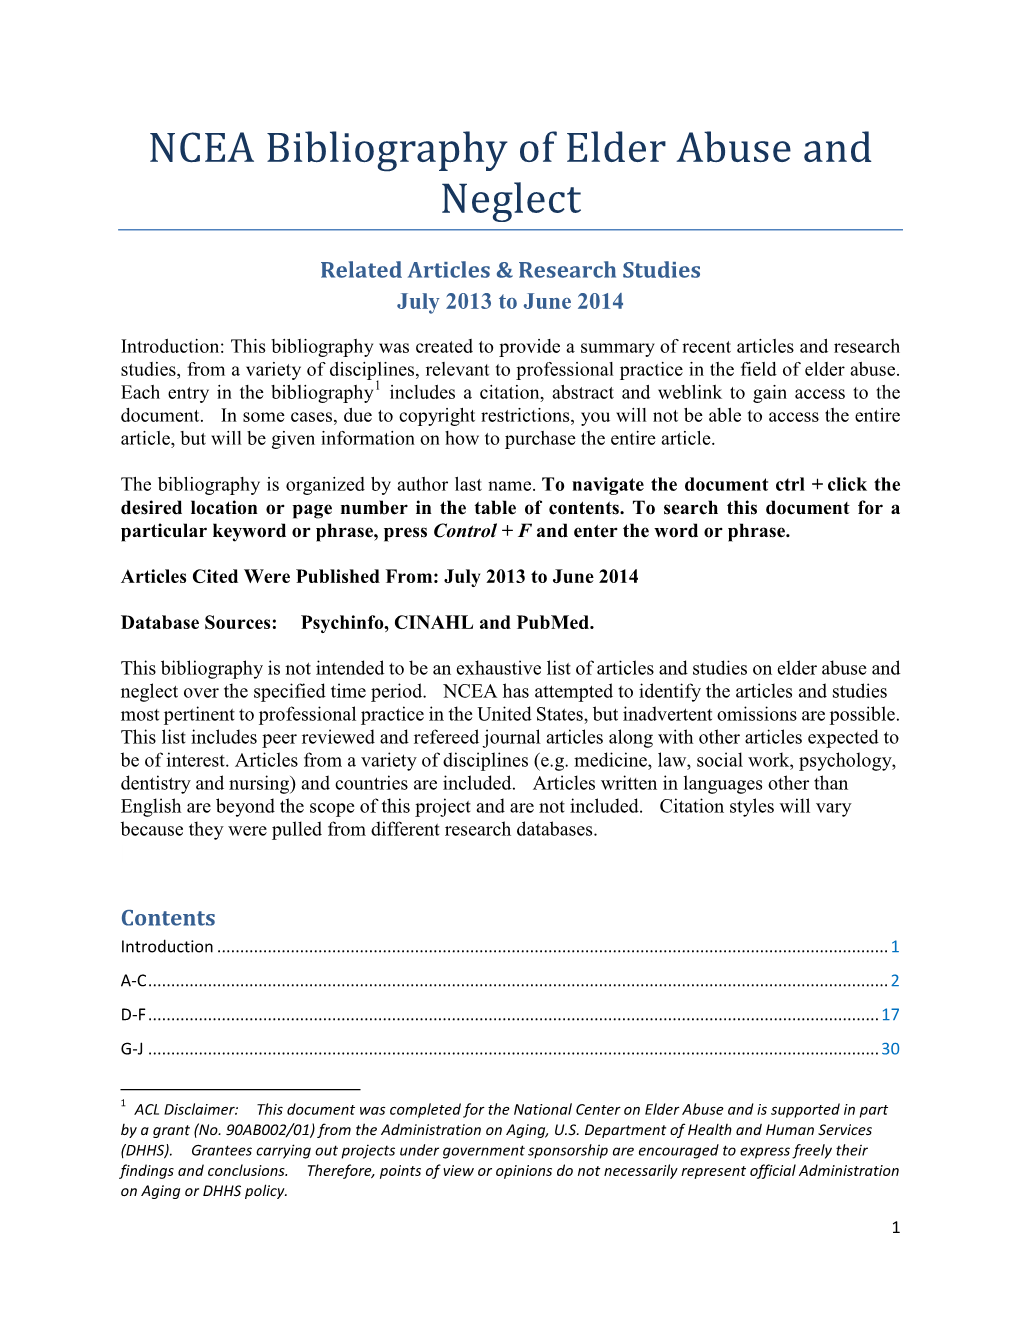 NCEA Bibliography of Elder Abuse and Neglect